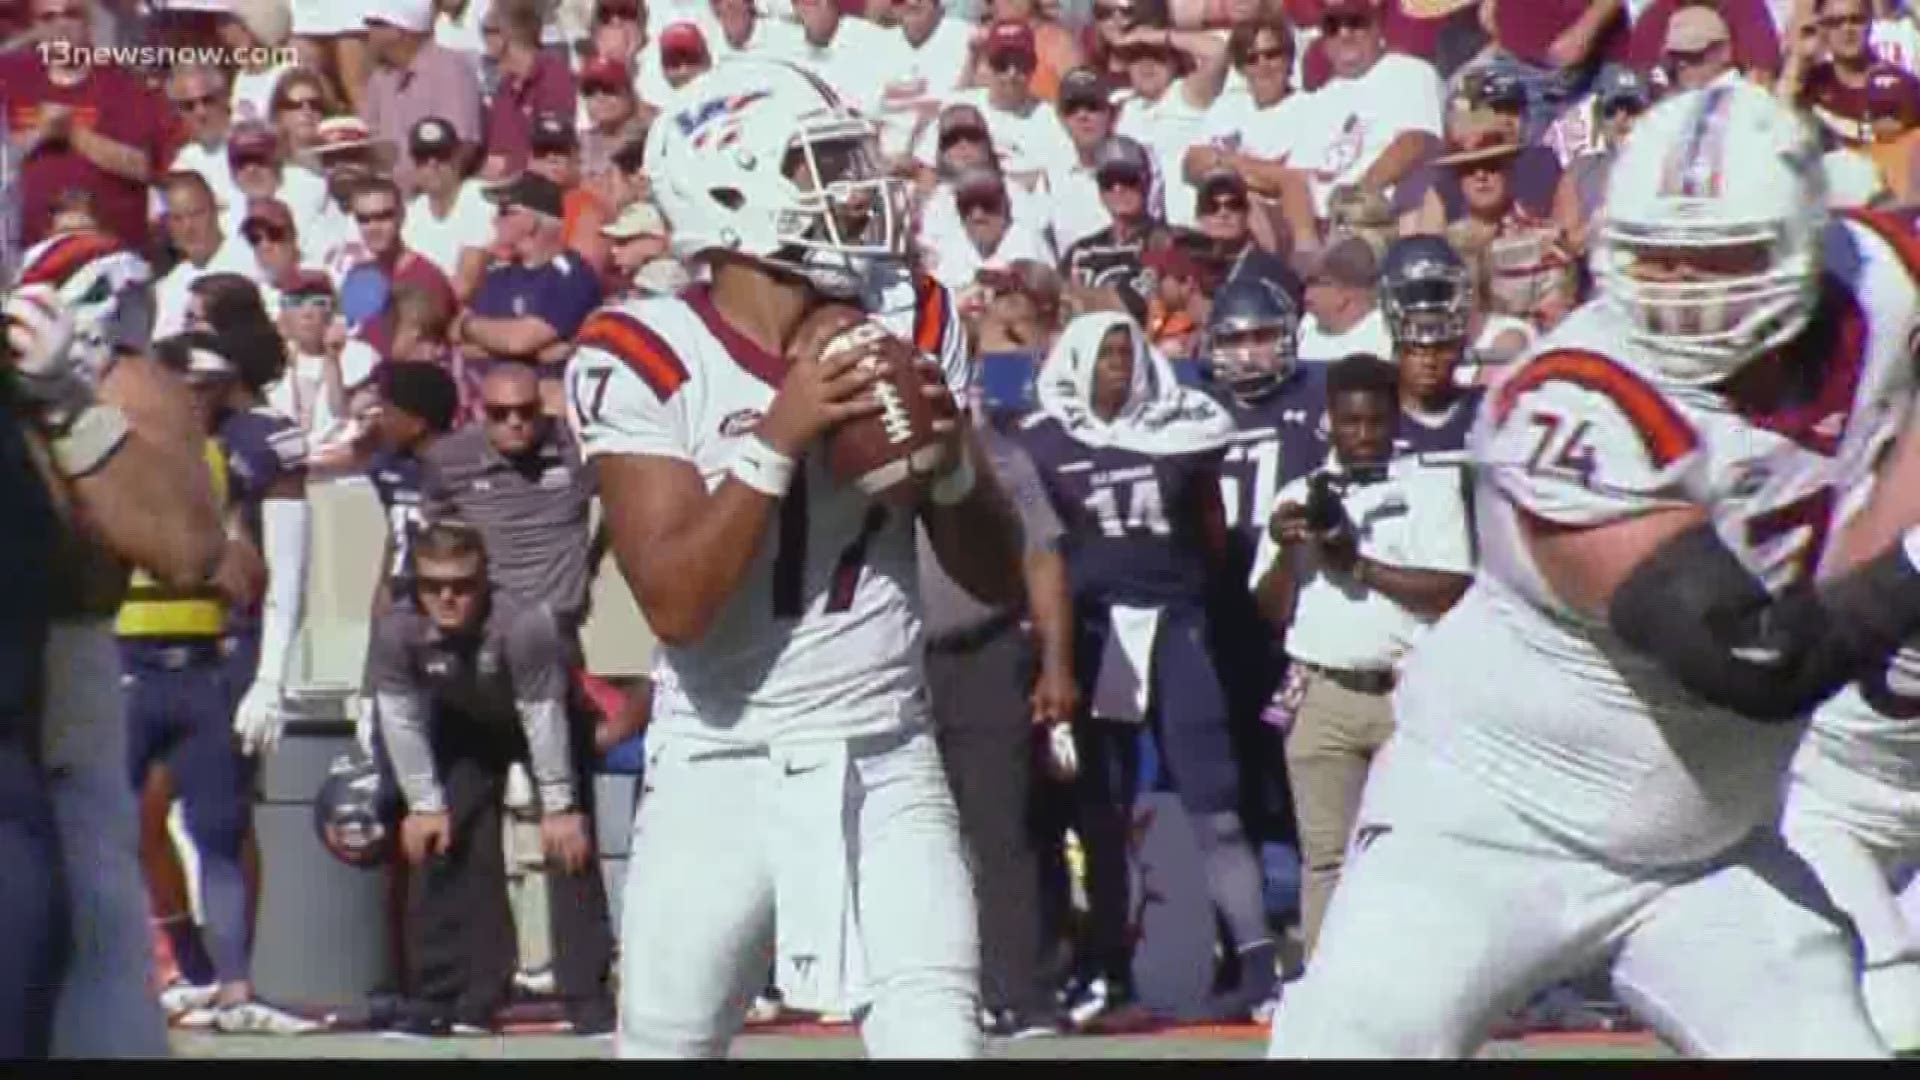 Multiple reports say academic issues have been resolved and Jackson, the Virginia Tech quarterback, remains a full member of the team.